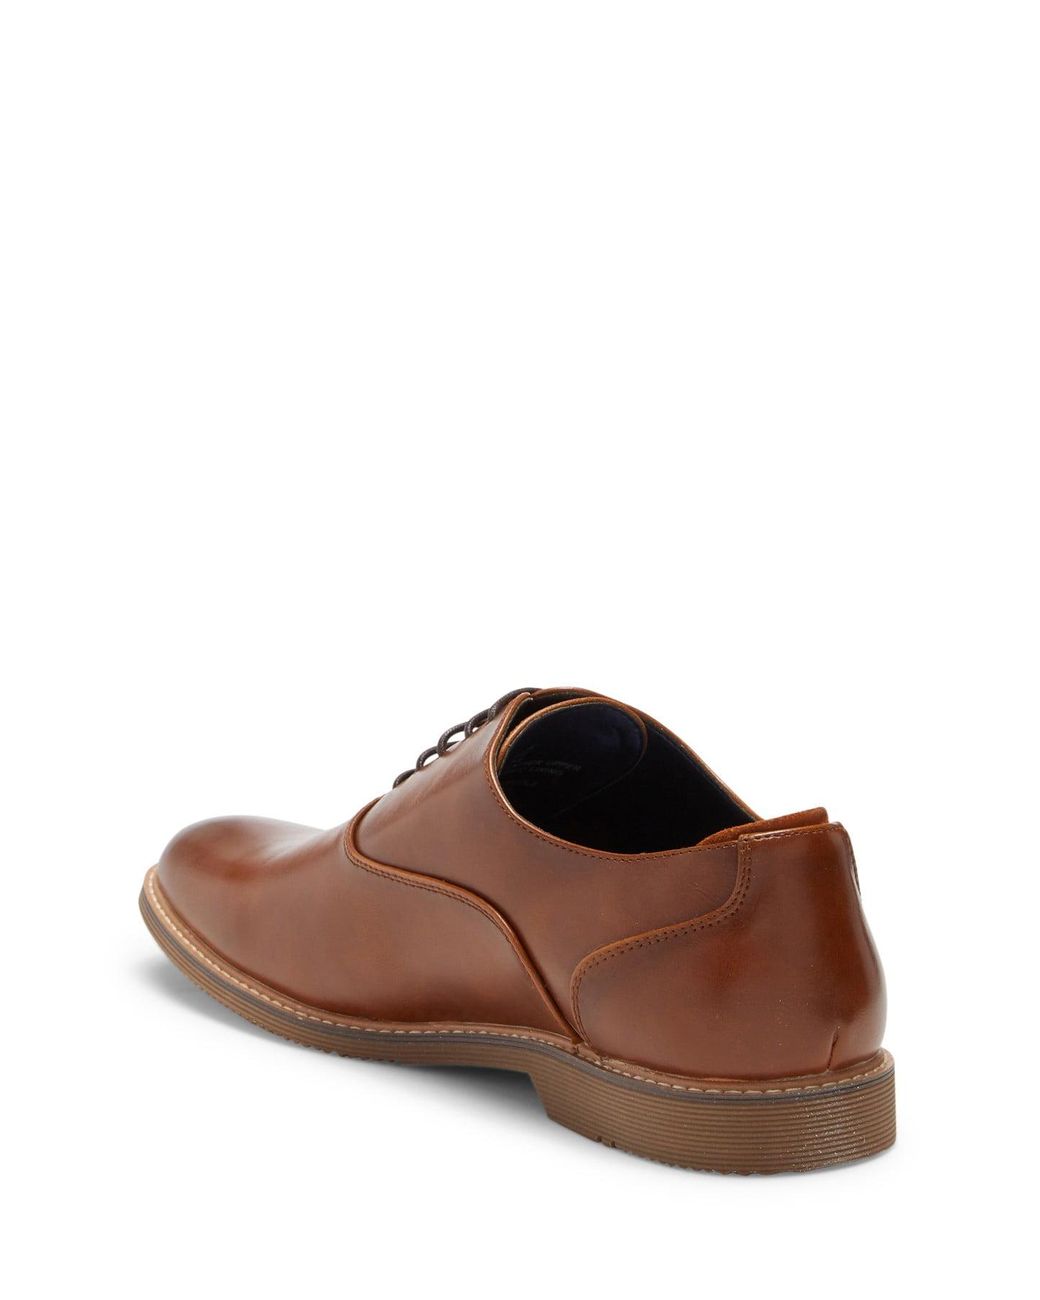 Steve Madden Ollie Leather Oxford in 